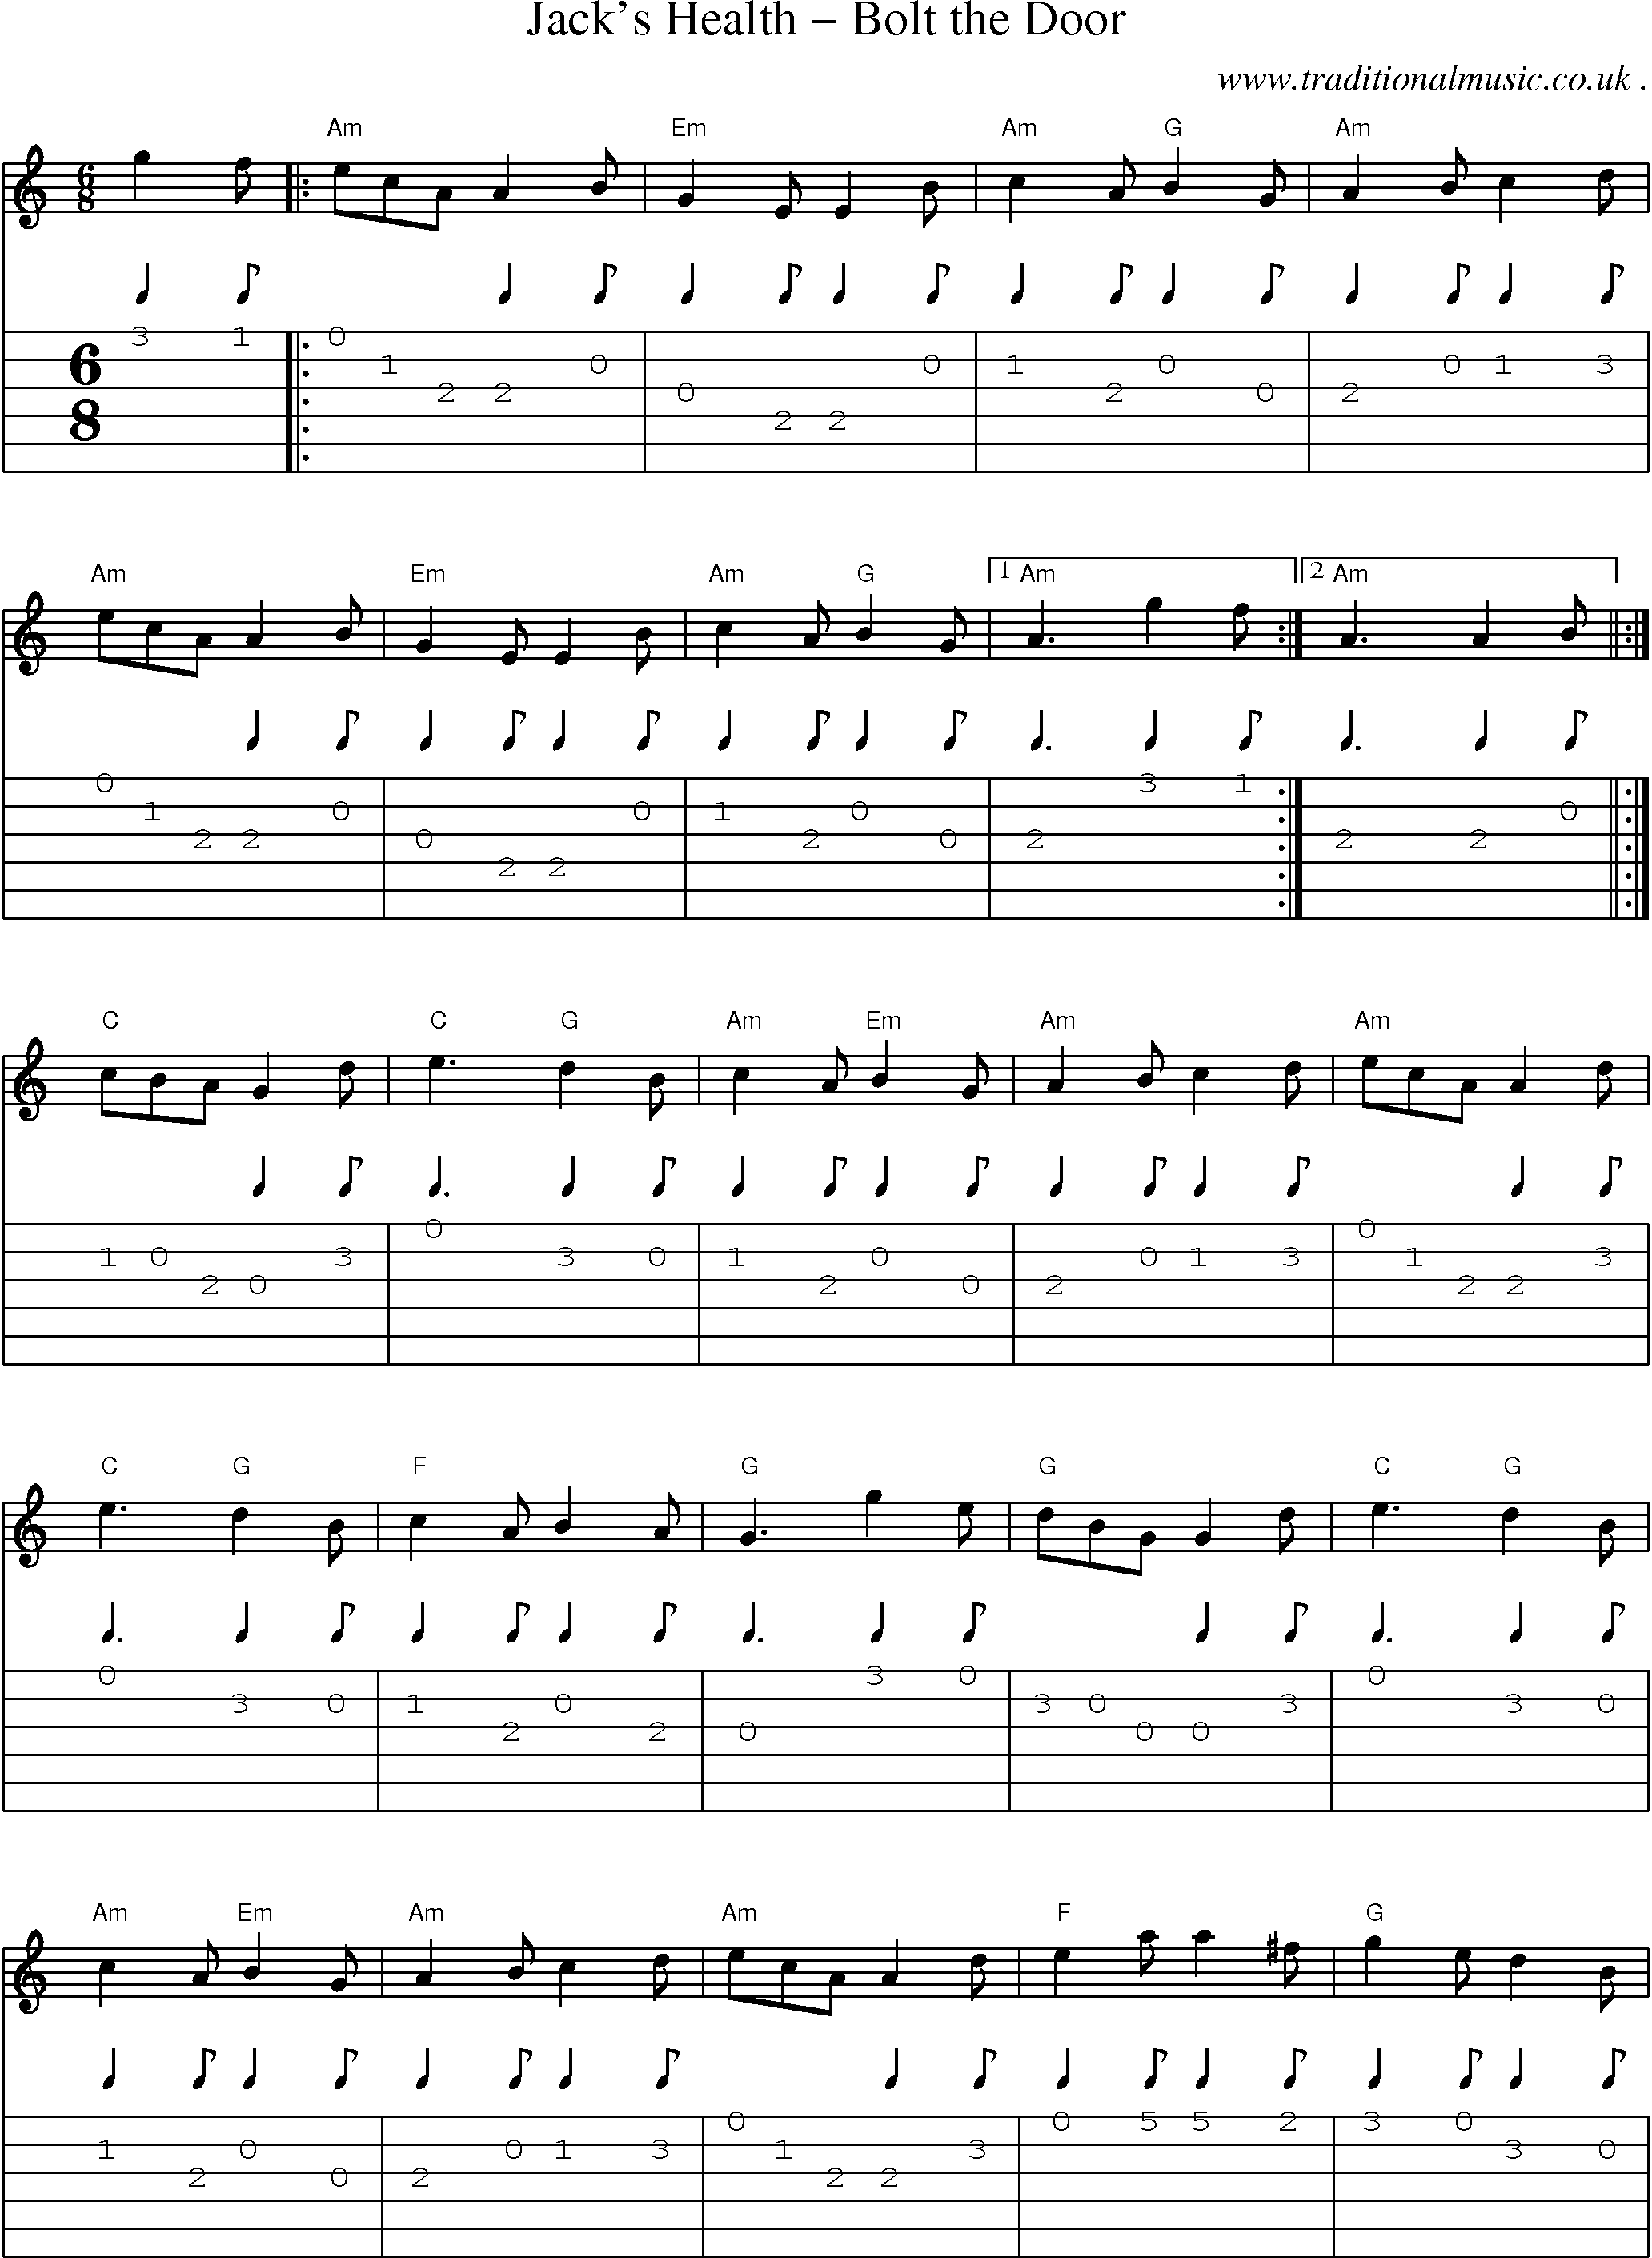 Sheet-Music and Guitar Tabs for Jacks Health Bolt The Door